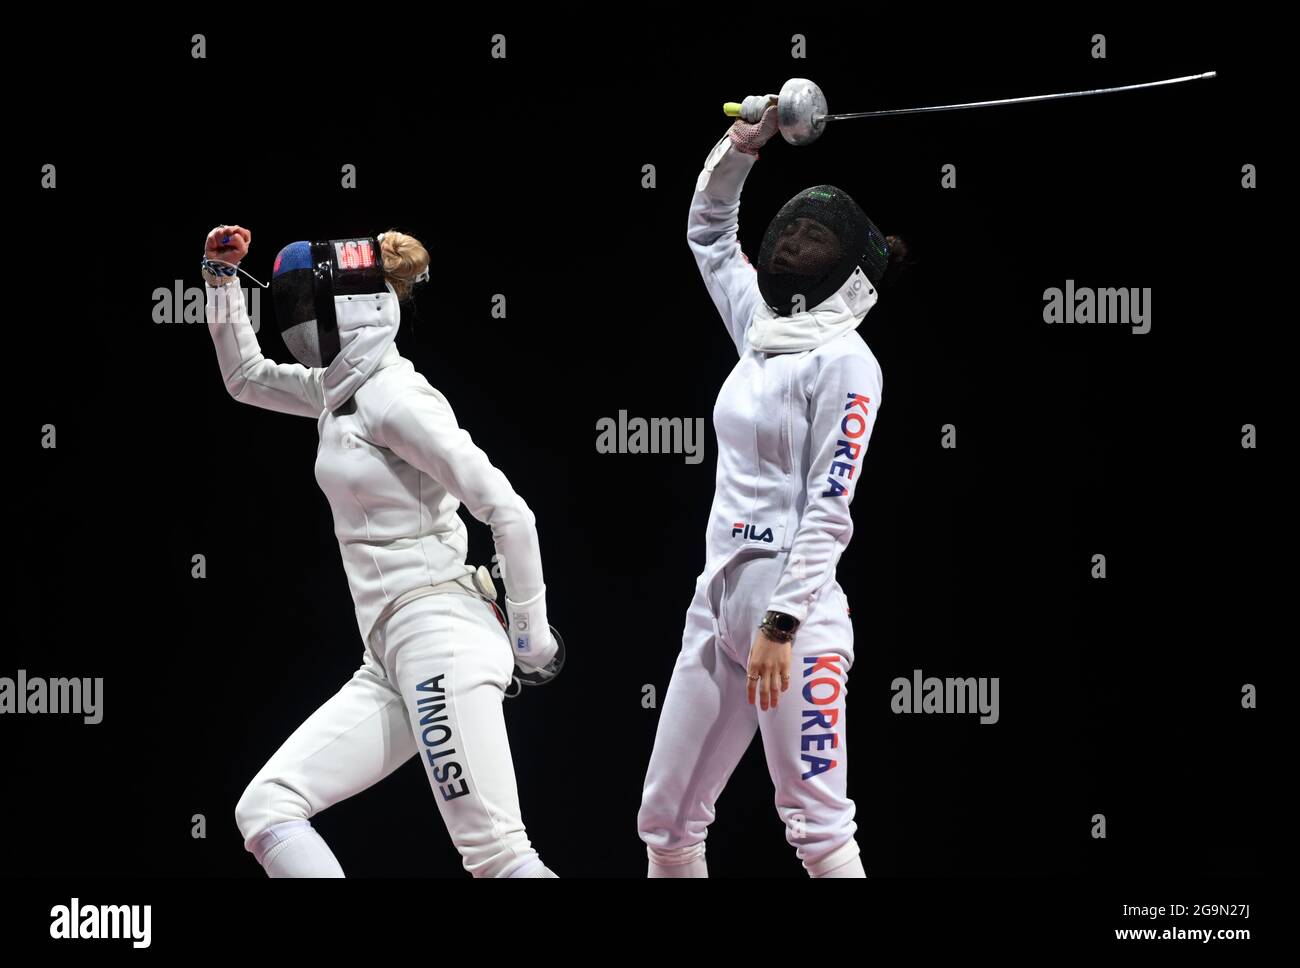 Tokyo, Japan. 27th July, 2021. Katrina Lehis (L) of Estonia and Choi  Injeong of South Korea react during the fencing women's epee team final  between Estonia and South Korea at the Tokyo